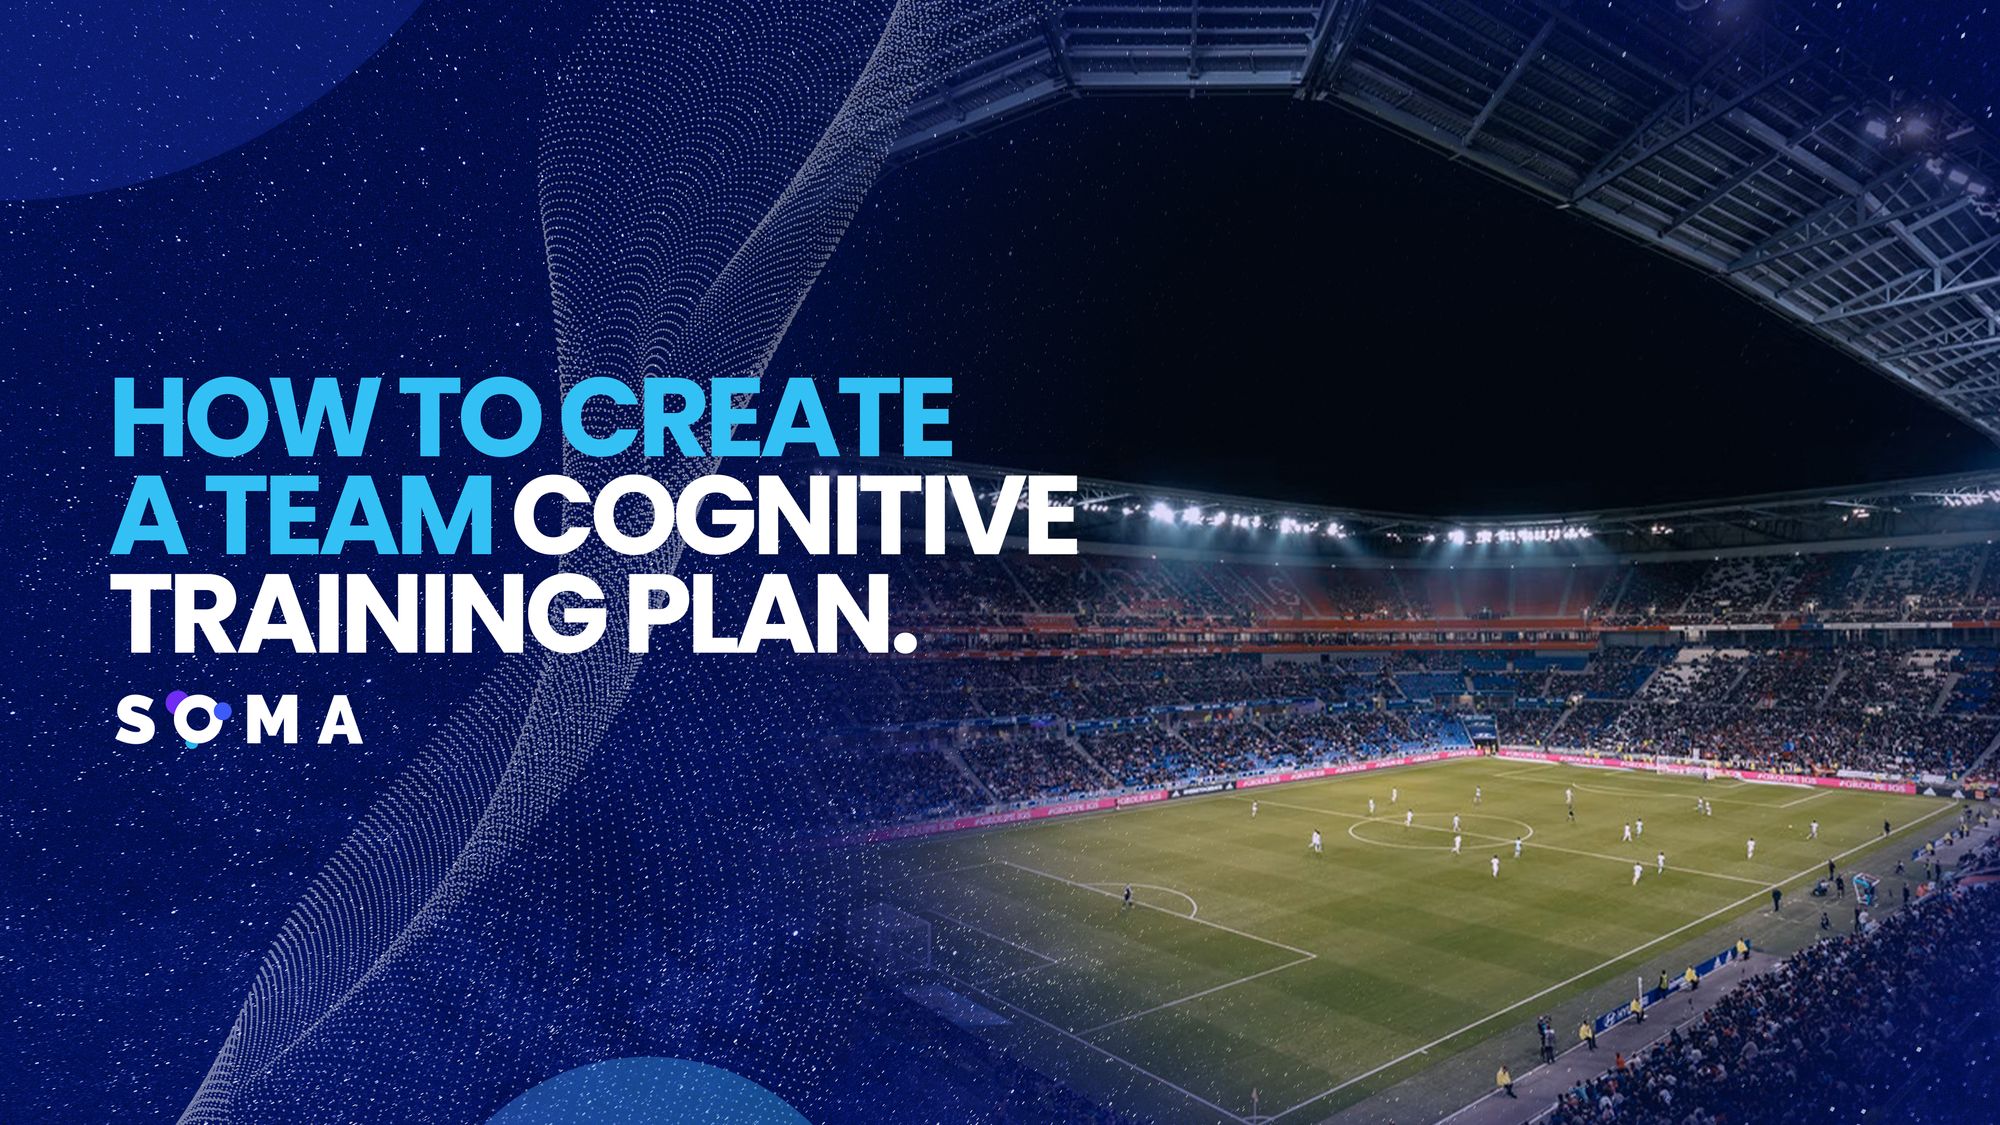 How To Create A Team Cognitive Training Plan.